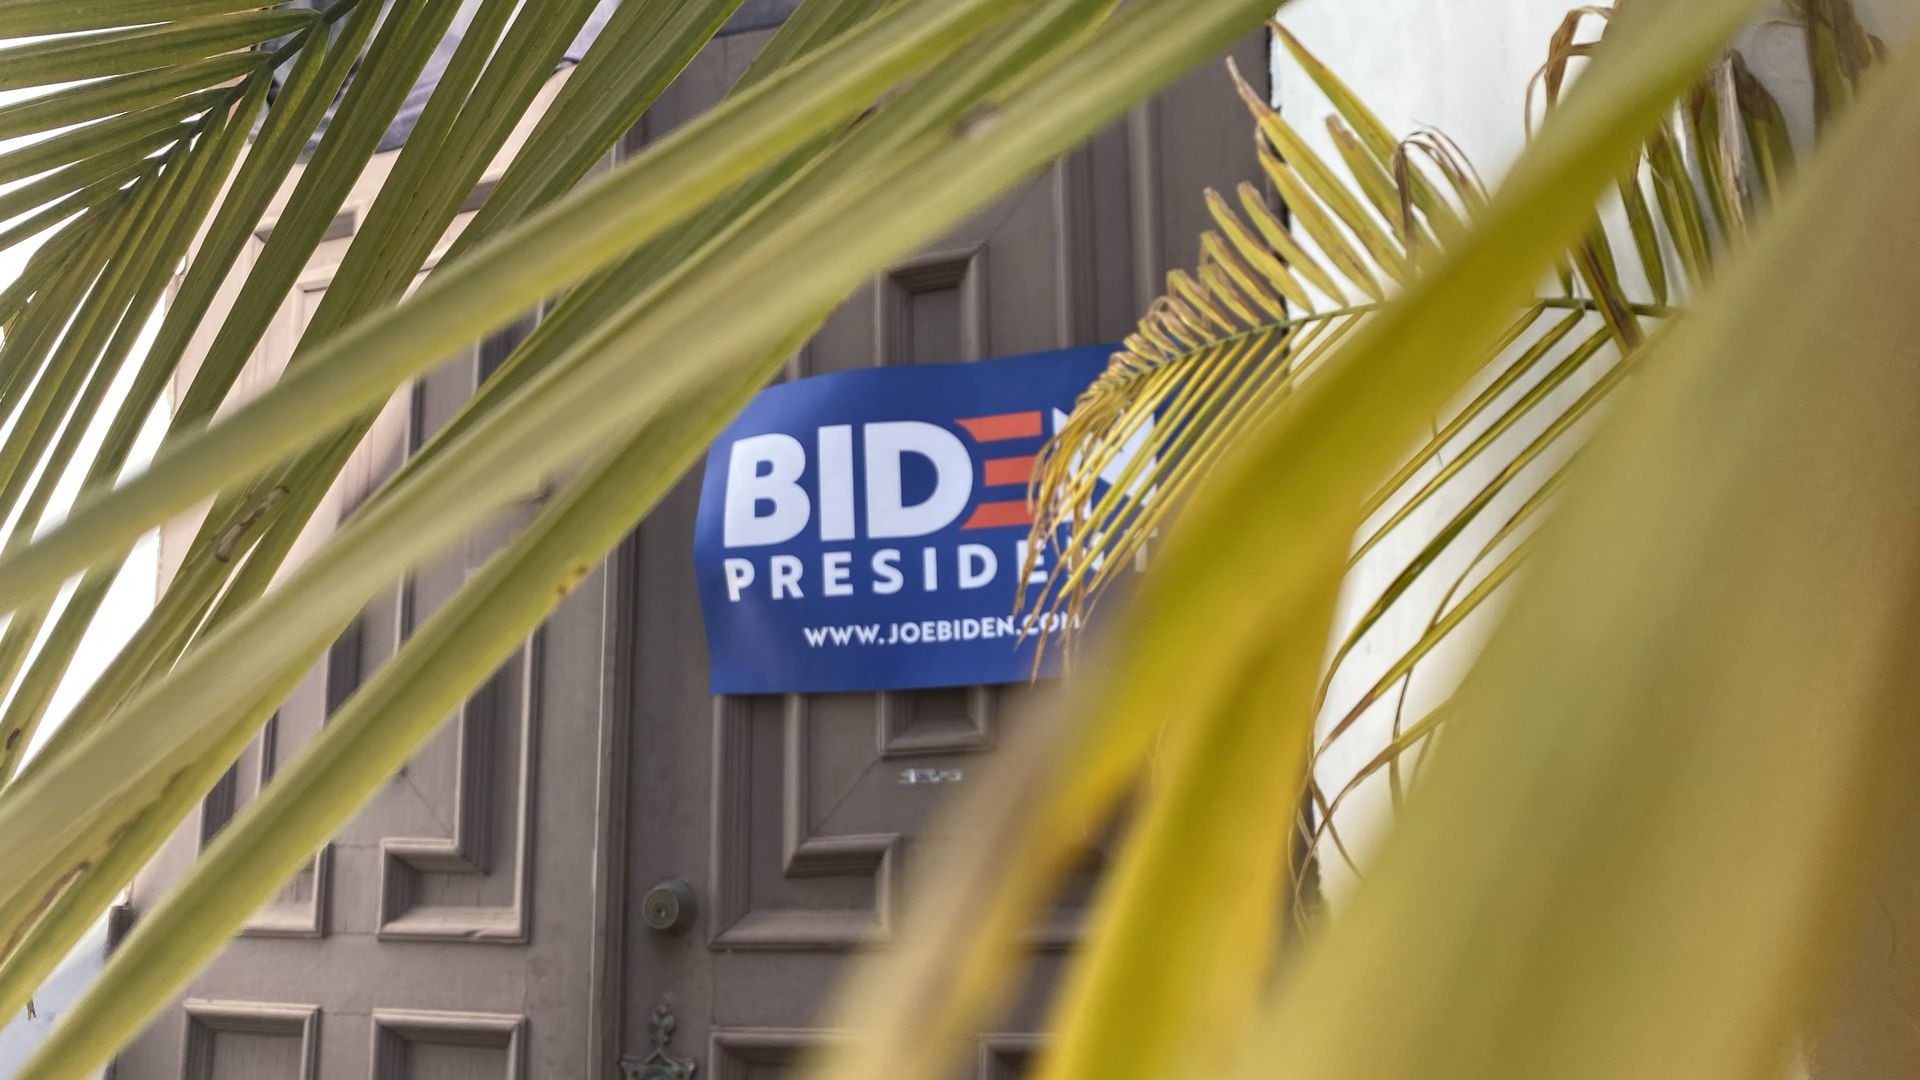 A Biden for President sign through the leaves of a palm tree